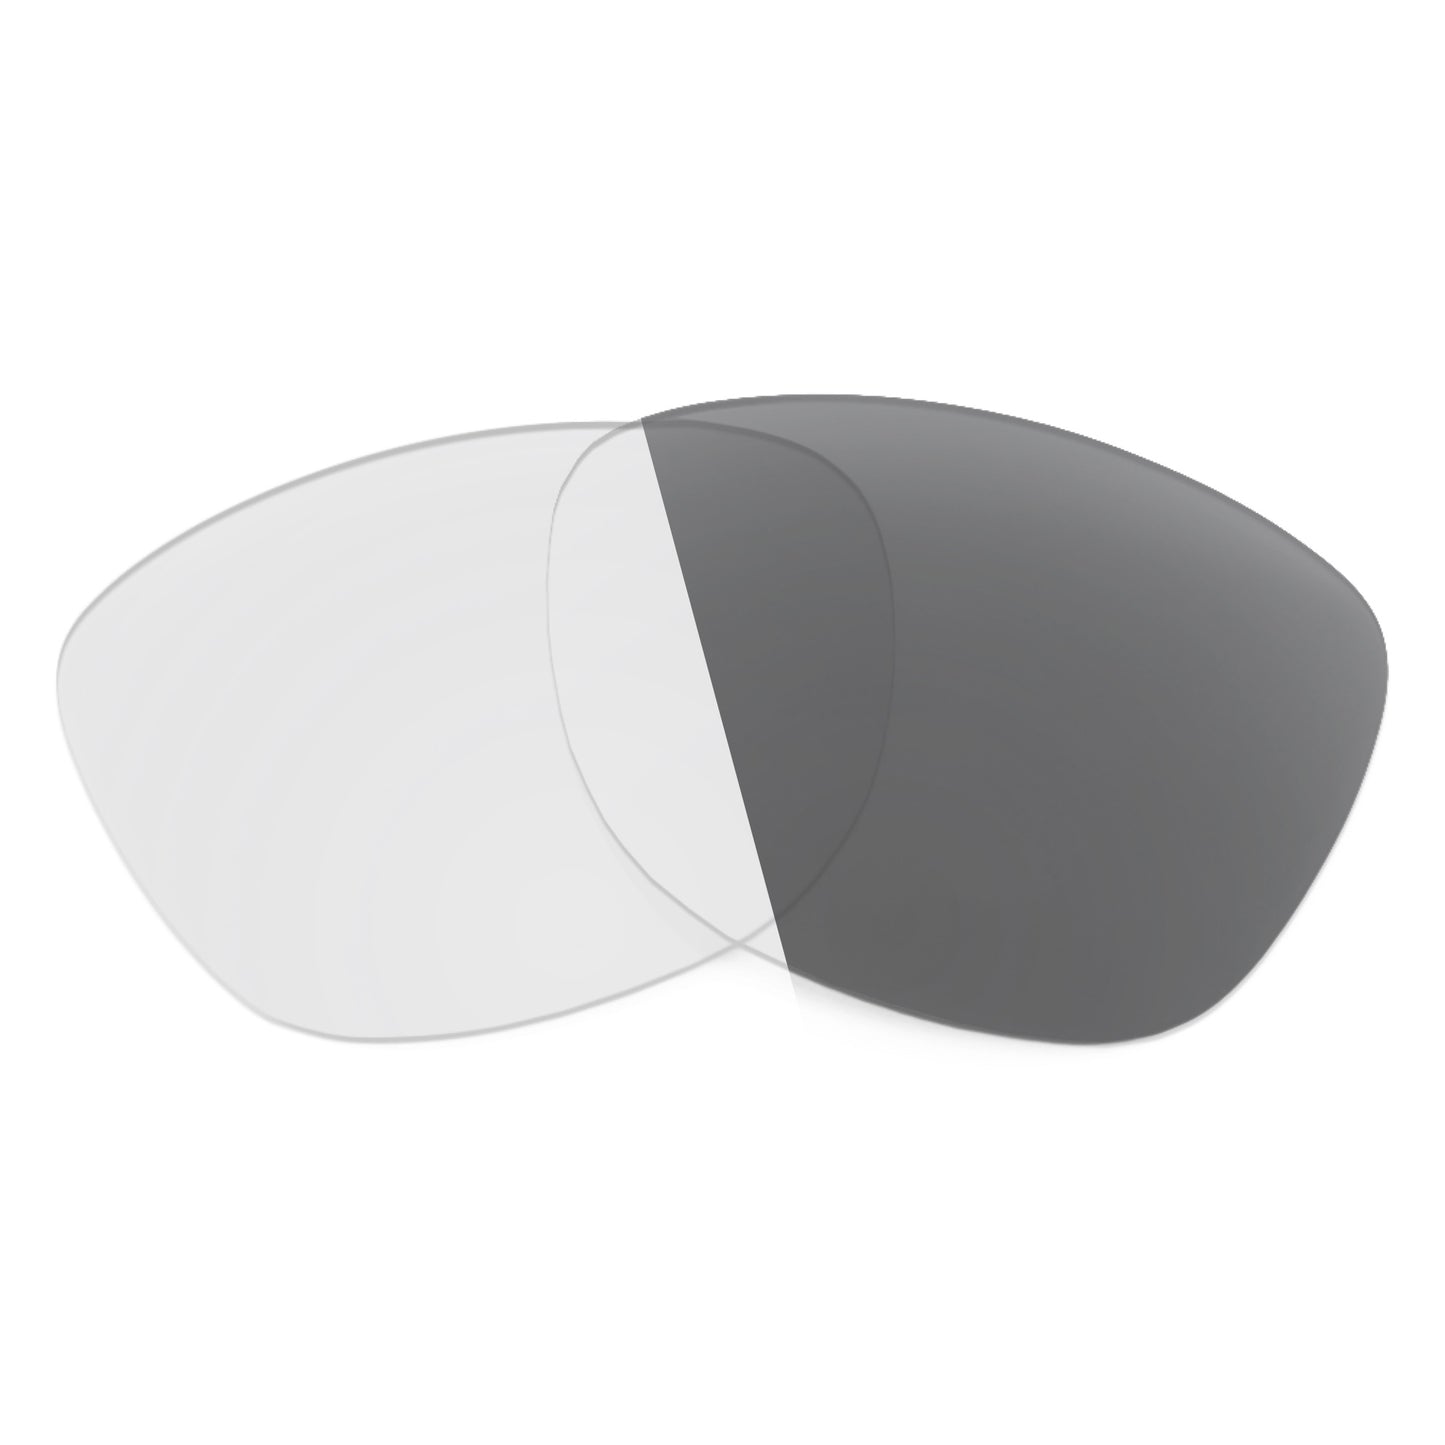 Revant replacement lenses for Ray-Ban Vagabond RB4152 Non-Polarized Adapt Gray Photochromic